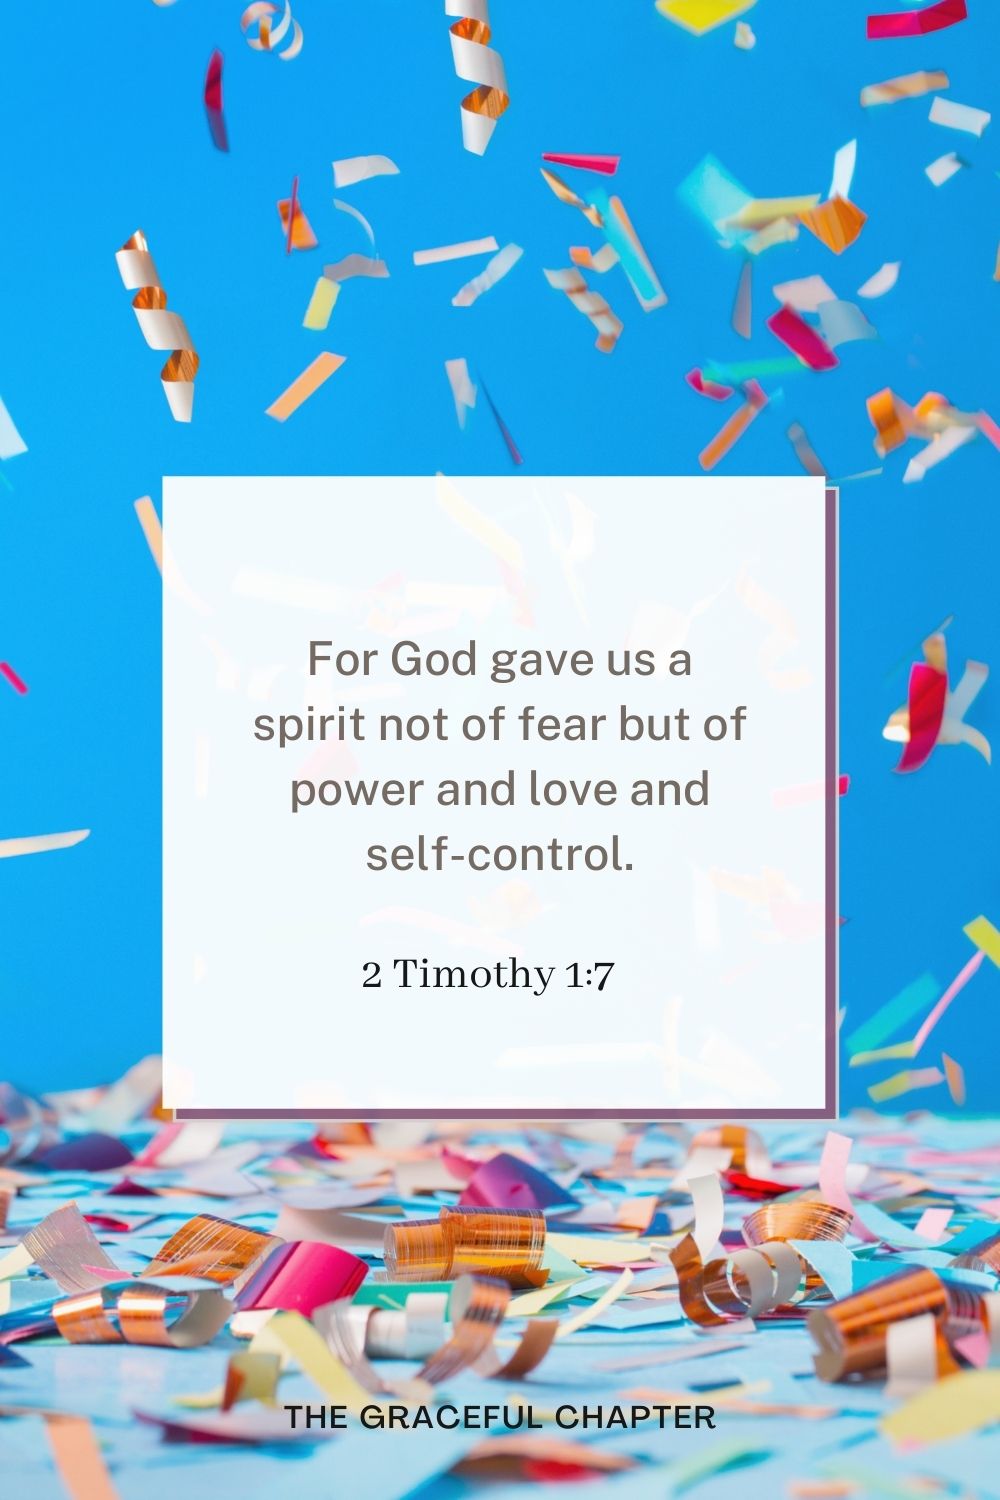 For God gave us a spirit not of fear but of power and love and self-control. 2 Timothy 1:7